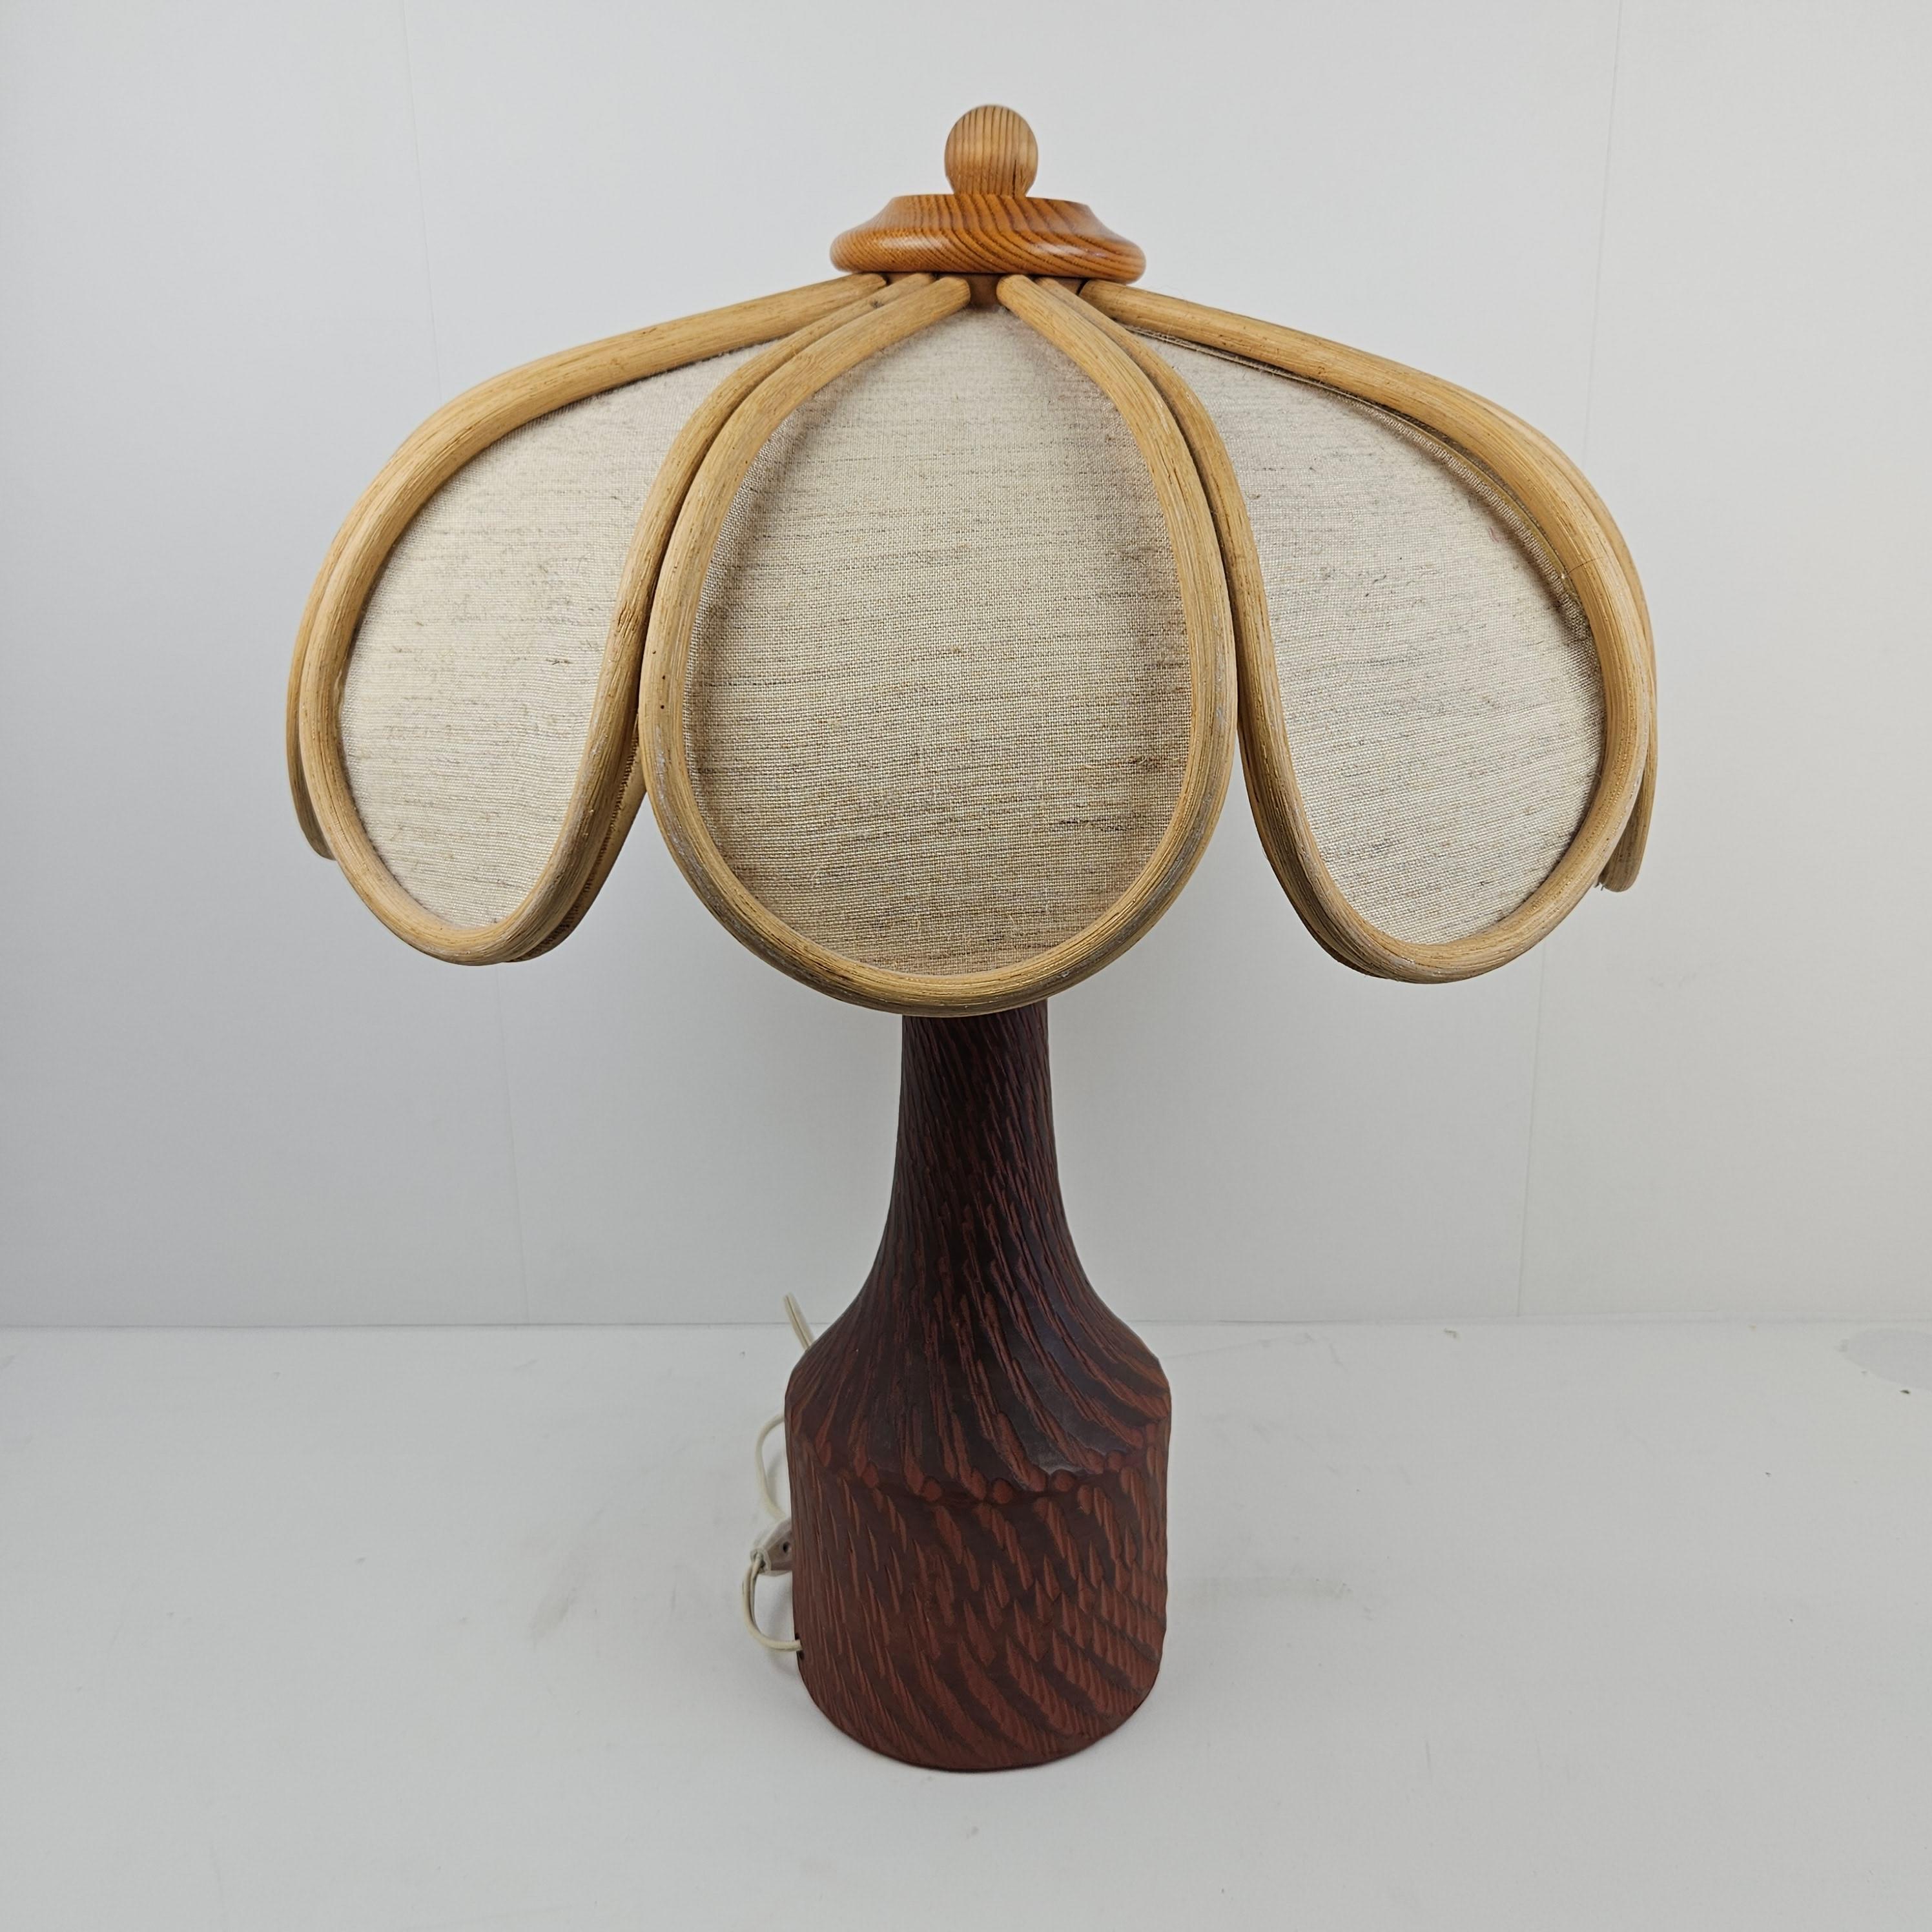 Very nice table lamp, fabricated in The Netherlands in the 70's.

The elegant shape makes it look like a palmtree.
The base is made of ceramic.

Some normal traces of use, see the pictures.